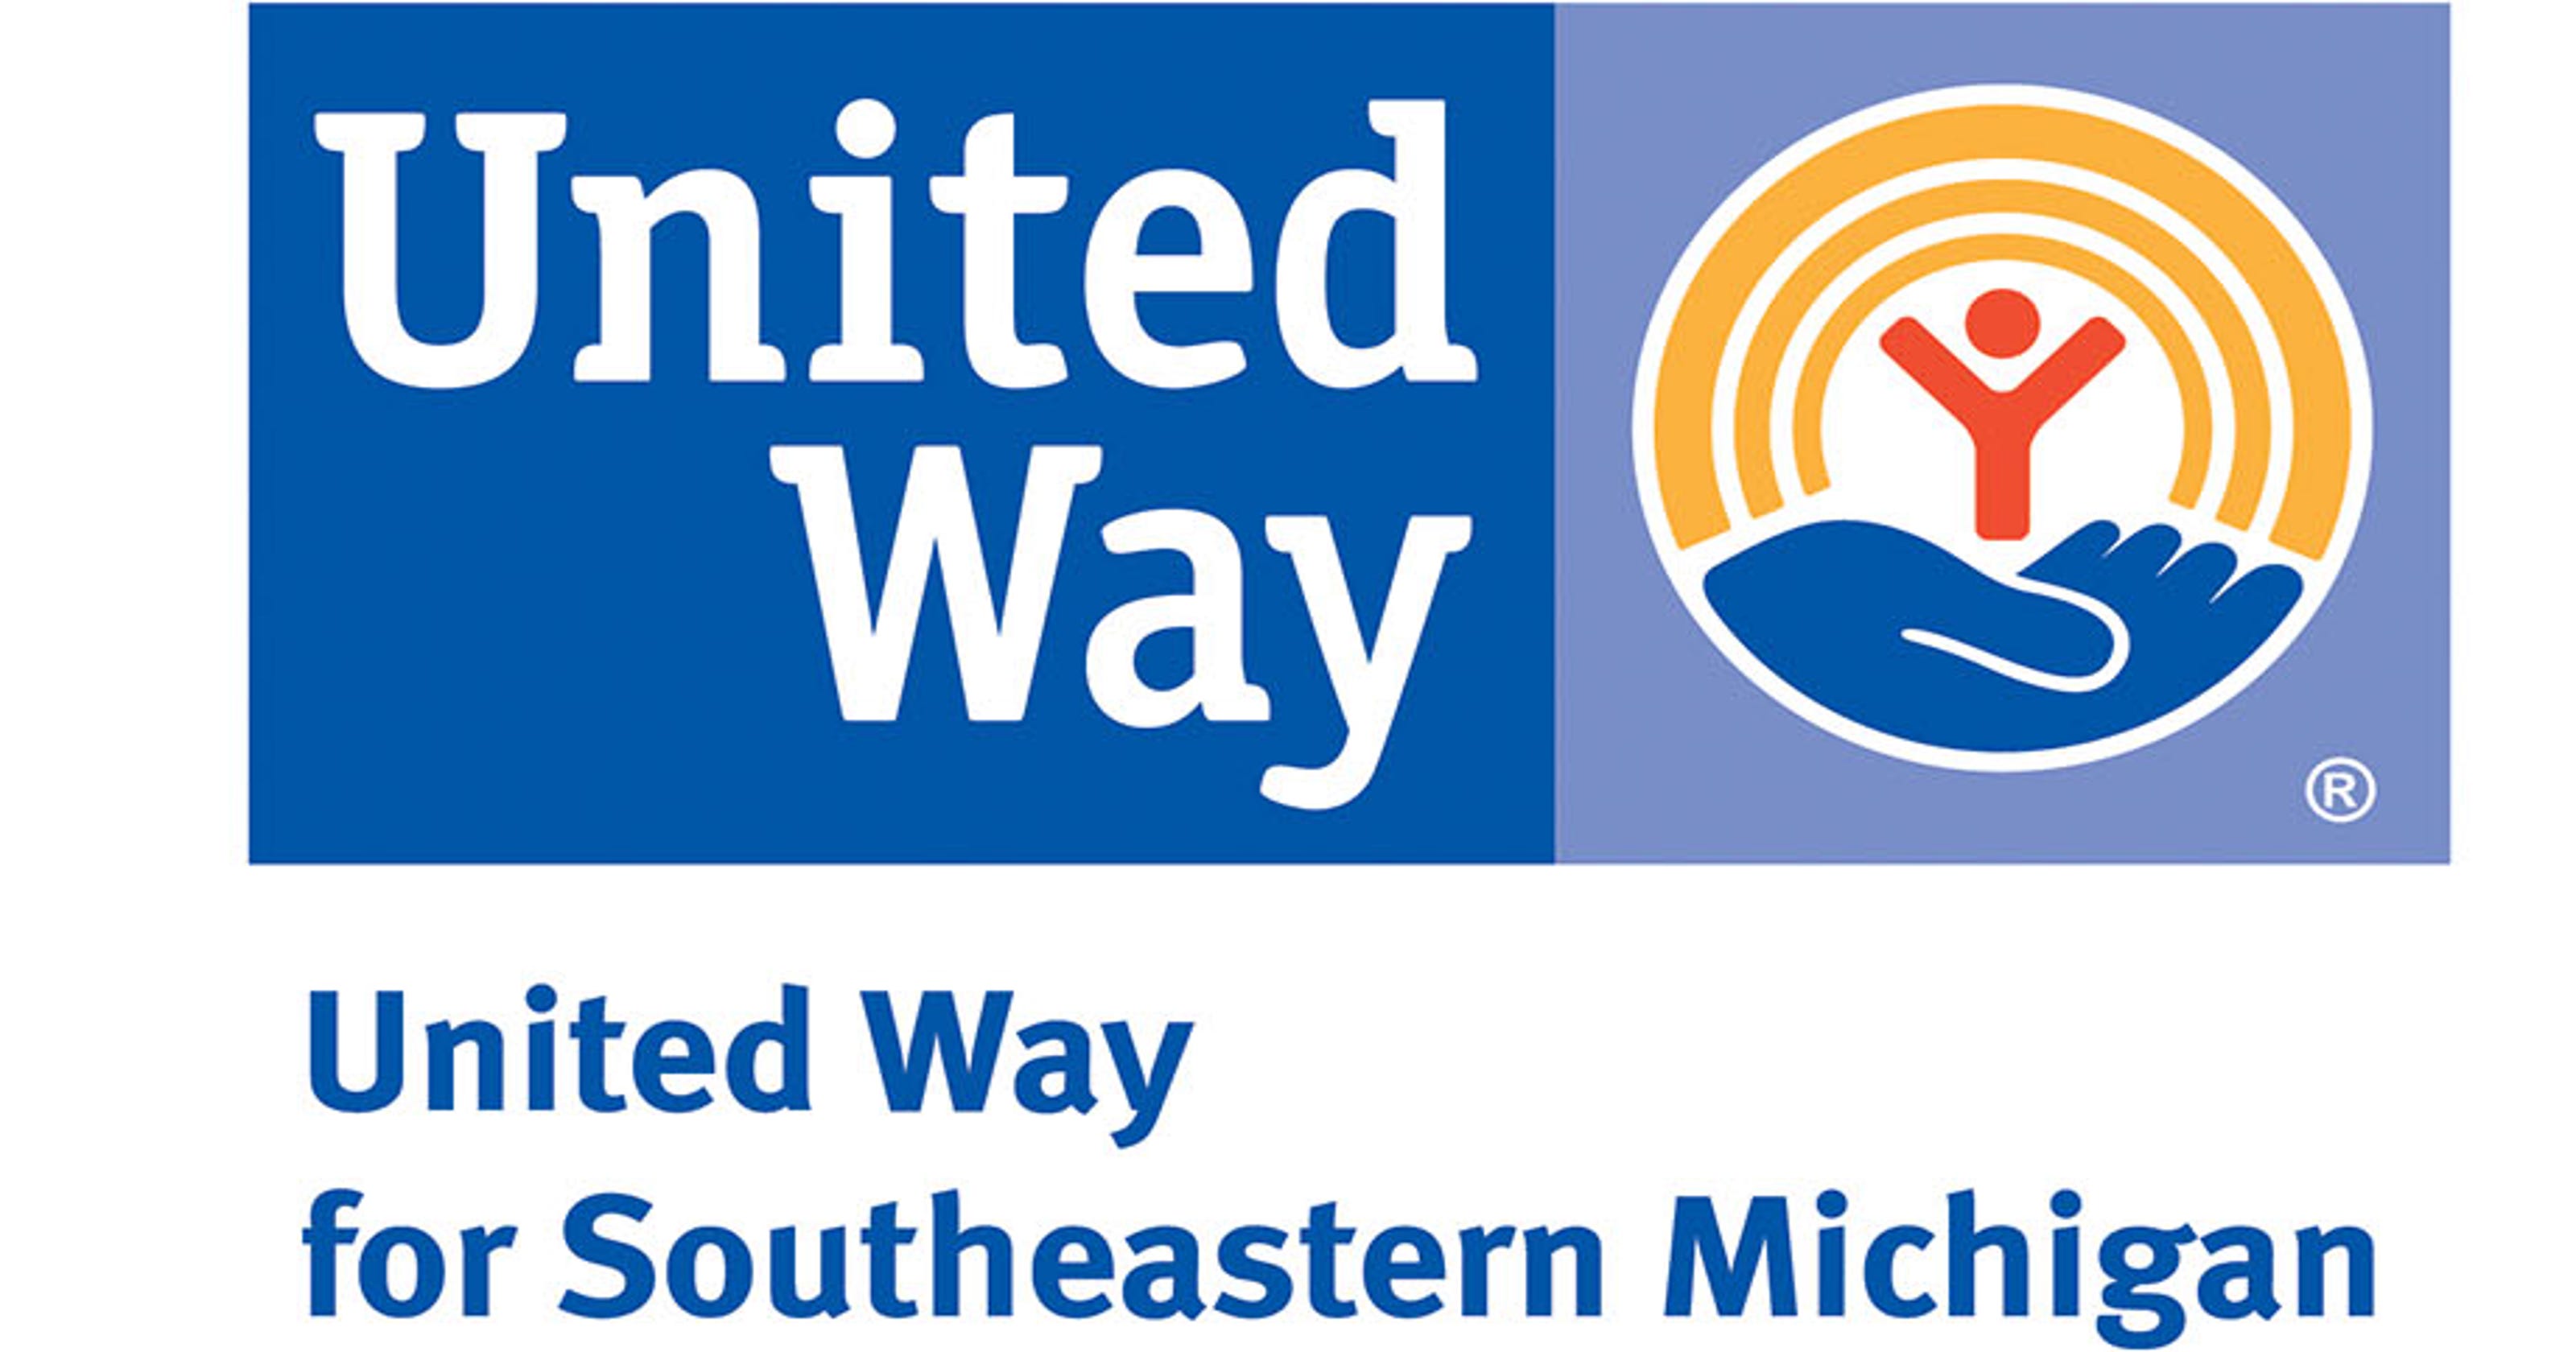 United Way New effort focusing on data to guide nonprofit decisions